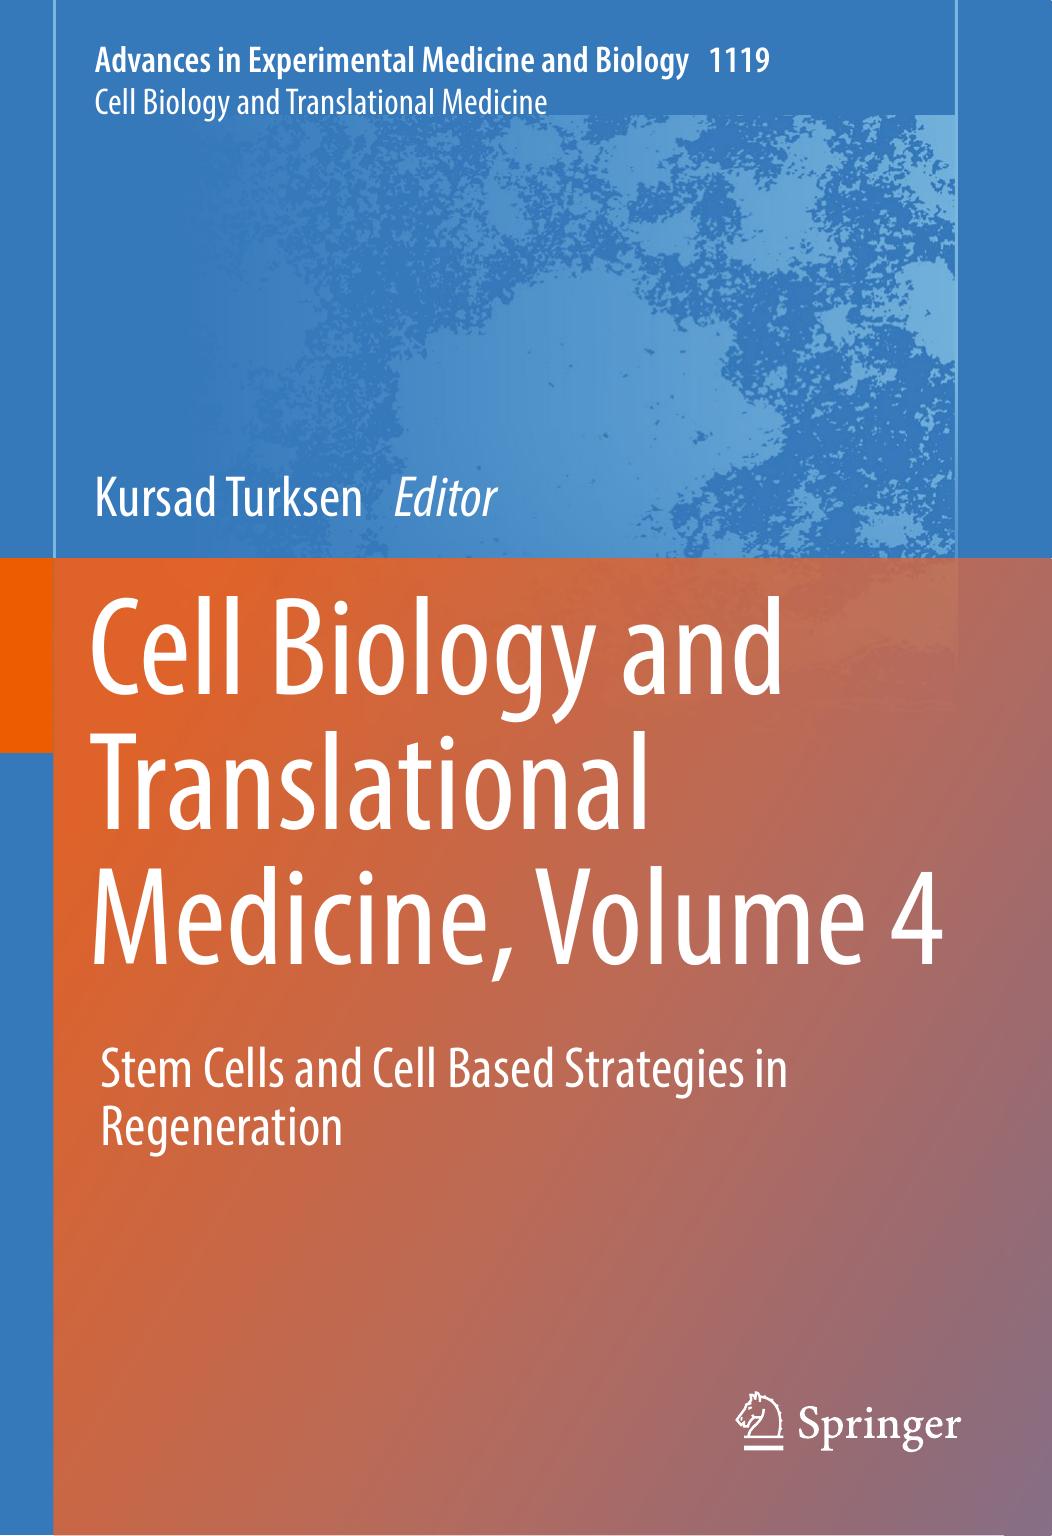 Cell Biology and Translational Medicine, Volume 4 Stem Cells and Cell Based Strategies in Regeneration 2018